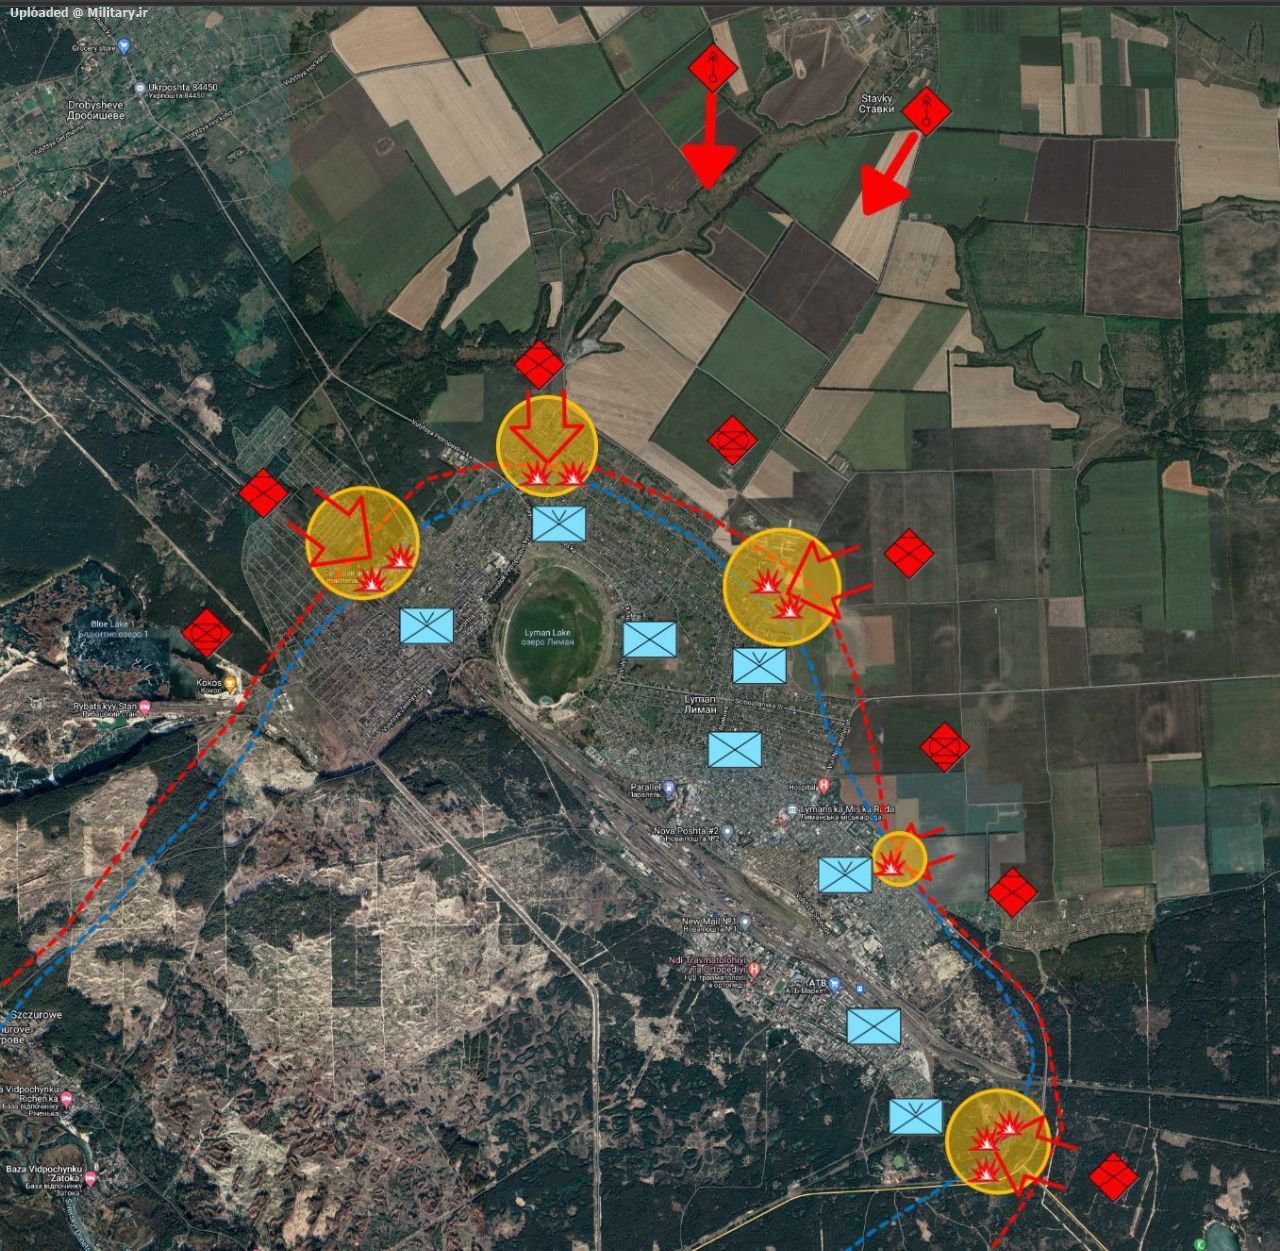 Map_control_in_Liman2Cacc_Ukraine_source